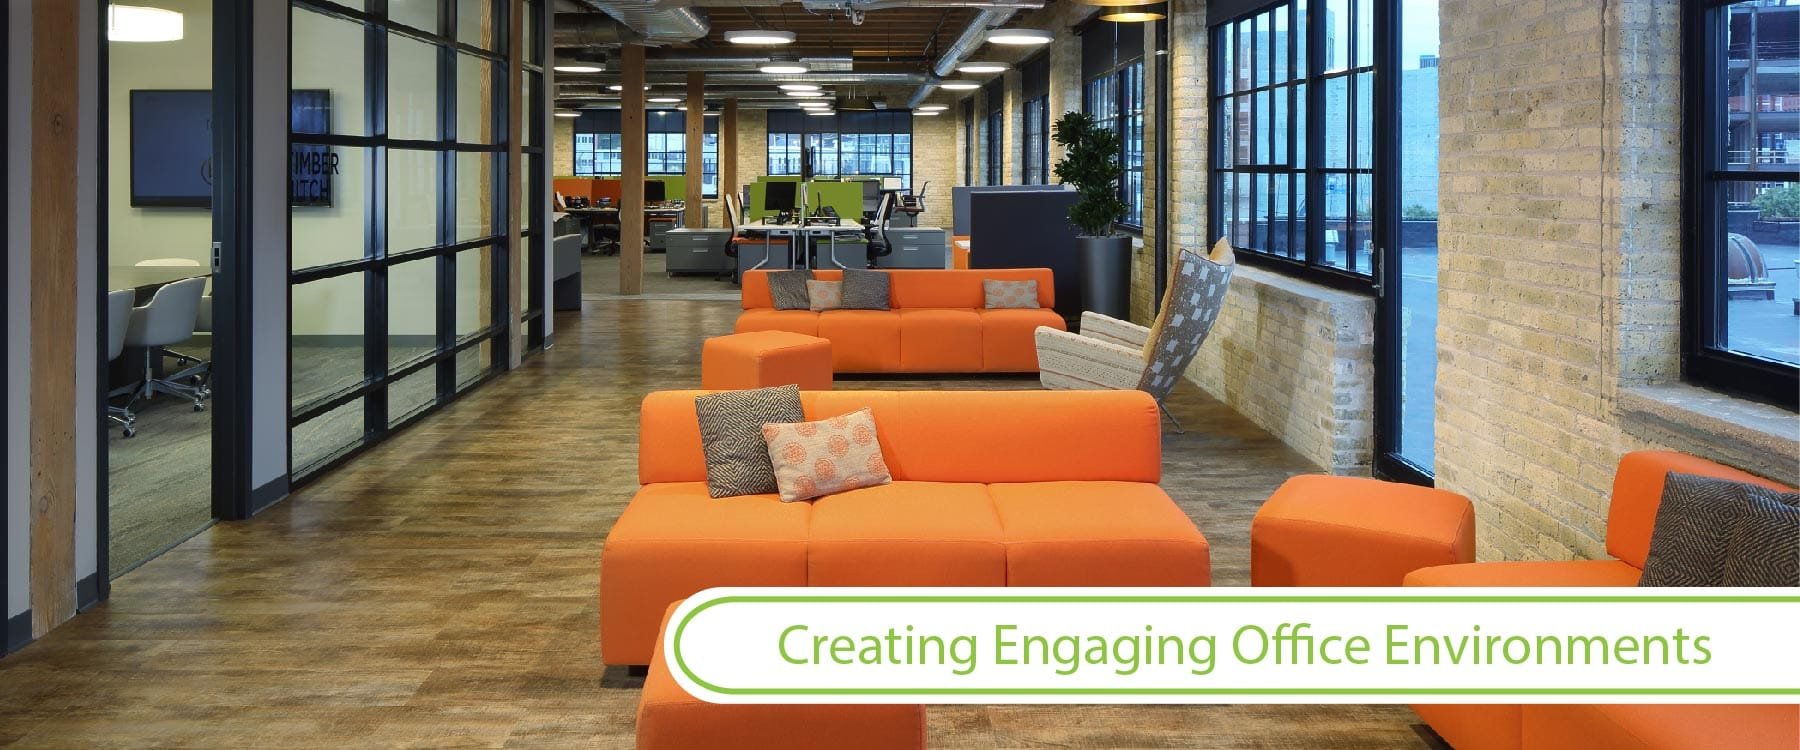 Creating Engaging Office Environments by PRA's Corporate Partner Michael Brush